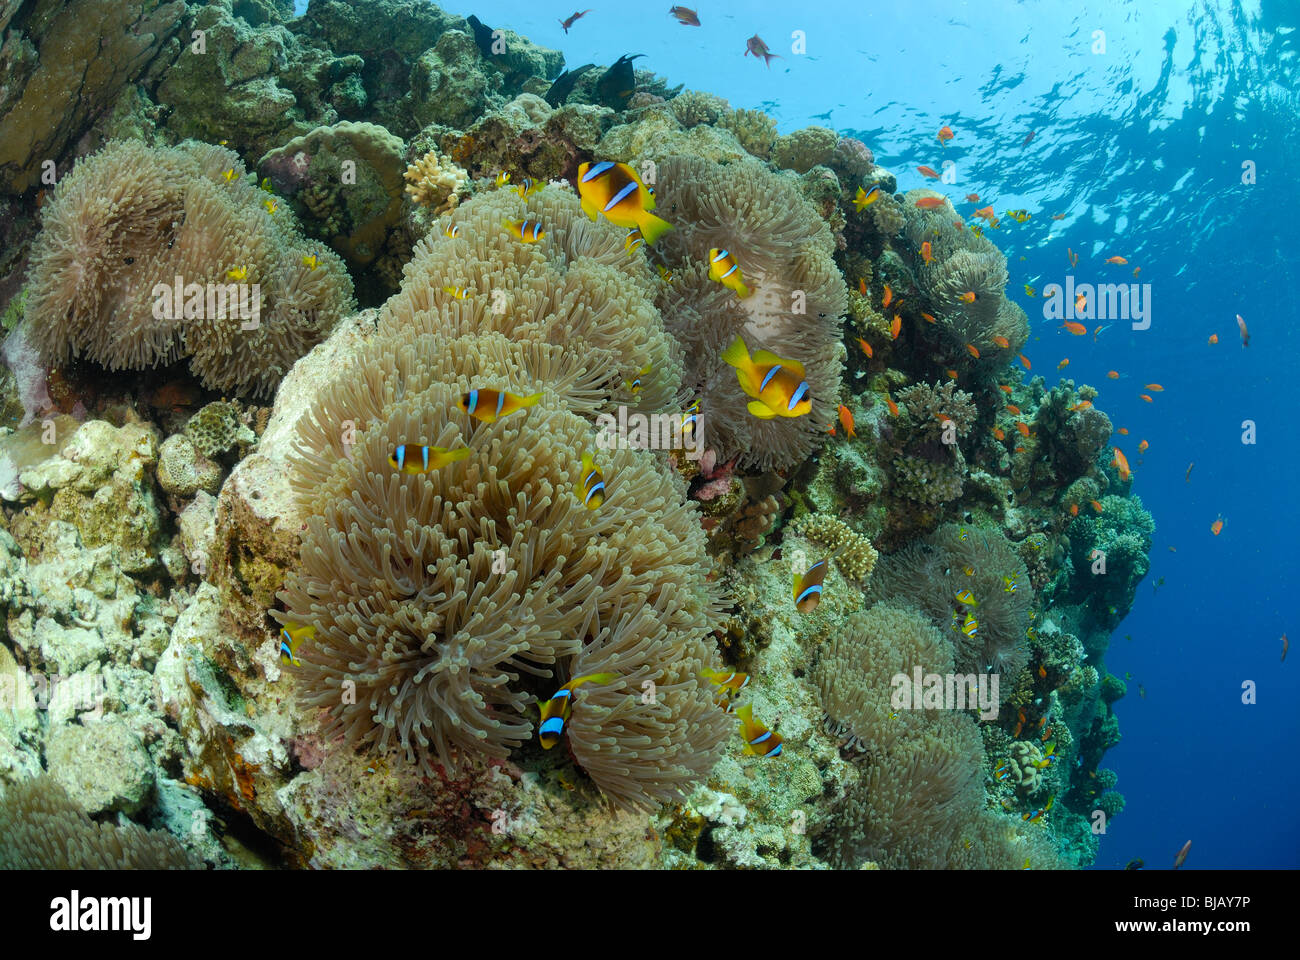 Anemones with twobands anemonefishes off Safaga, Egypt, Red Sea. Stock Photo